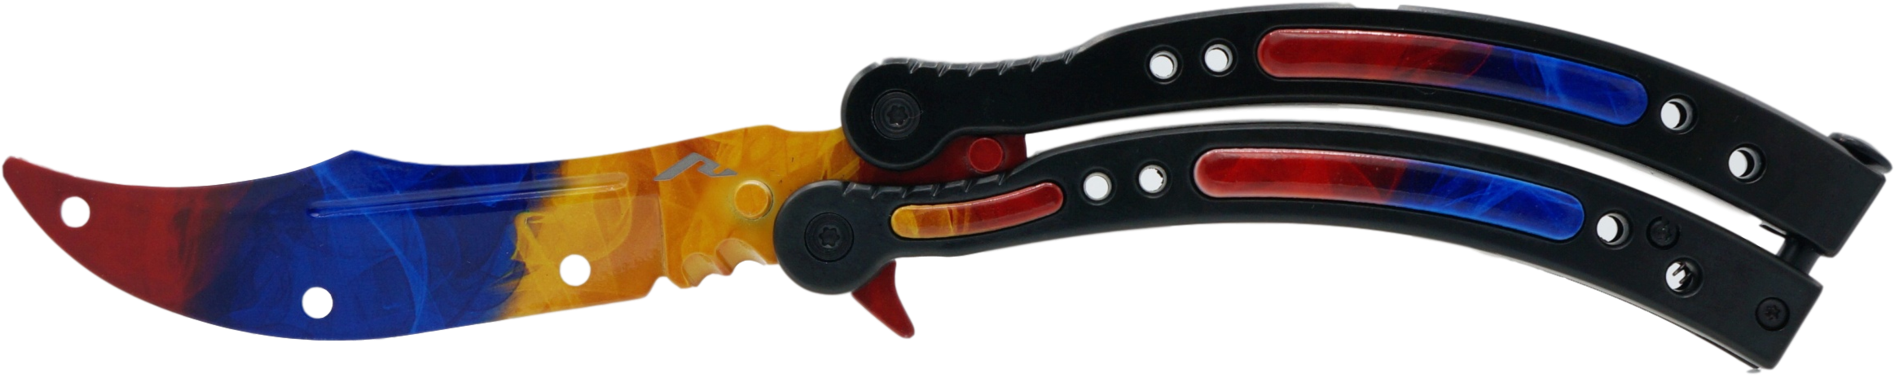 Marble Fade Butterfly Trainer - Cs Go Butterfly Knife Hyper Beast (2048x1359), Png Download